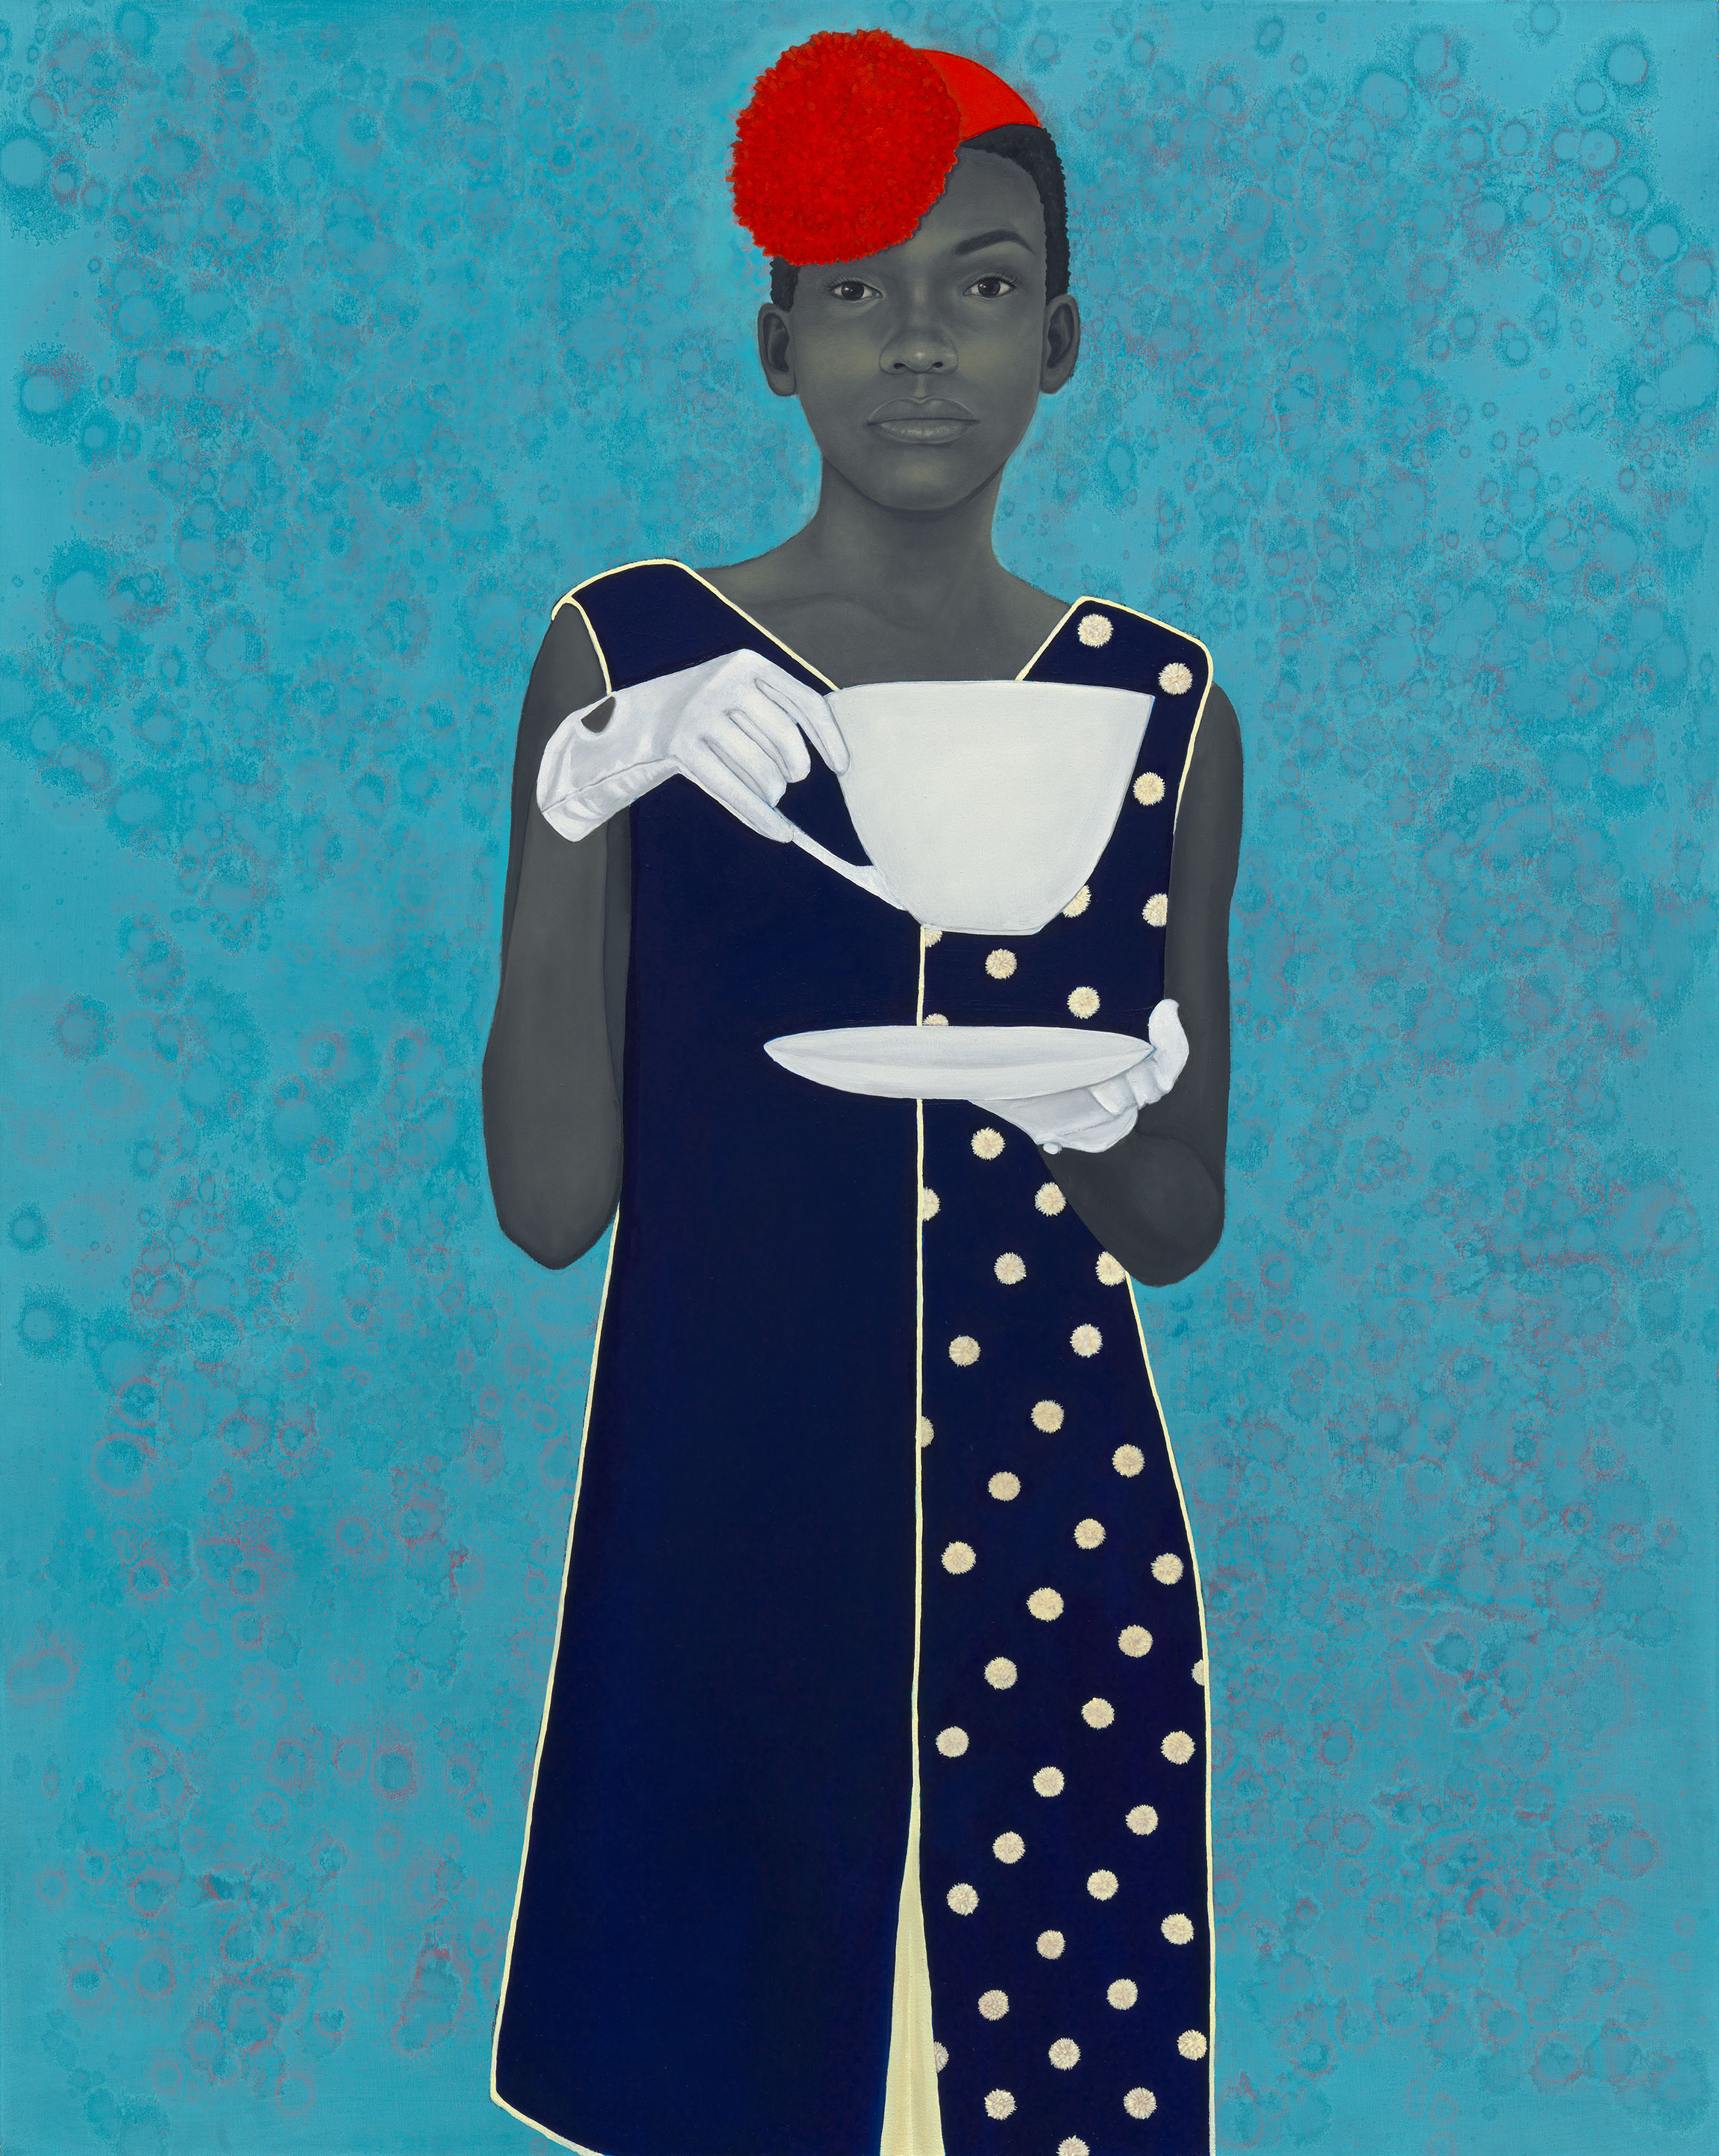 Painting of a young African American girl in a blue polka dot dress, wearing a red hat, and holding a white large teacup.  